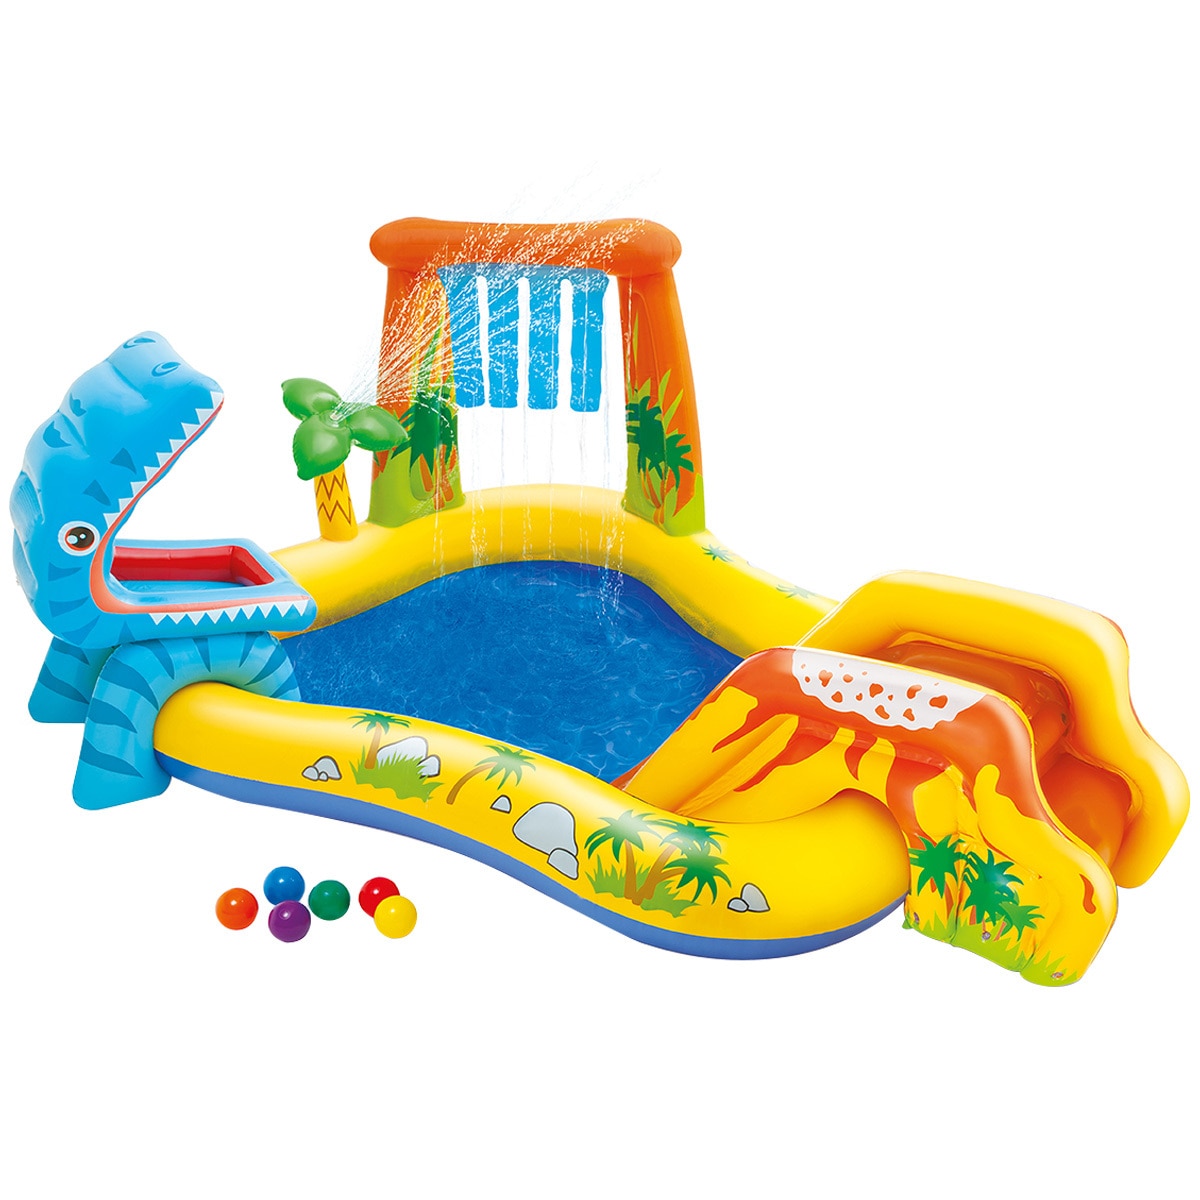 Intex Dinoland Play Center Kiddie Inflatable Pool and Dinosaur Water Splash Swimming Pool with Water Sprayers, Waterfalls, Slides, and Games並行輸入